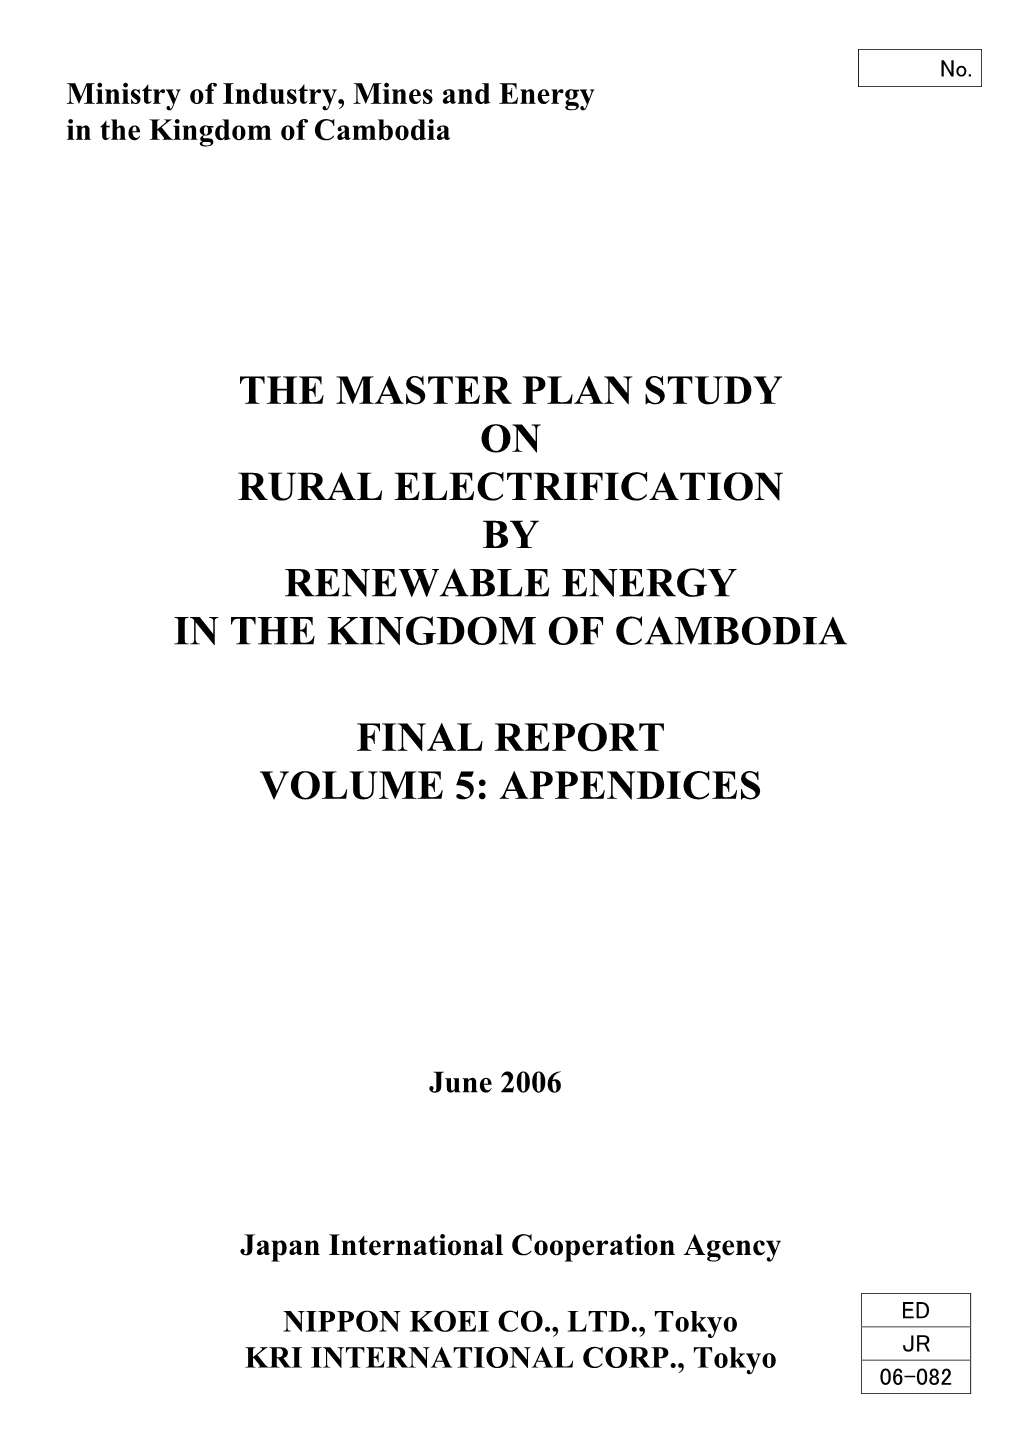 The Master Plan Study on Rural Electrification by Renewable Energy in the Kingdom of Cambodia